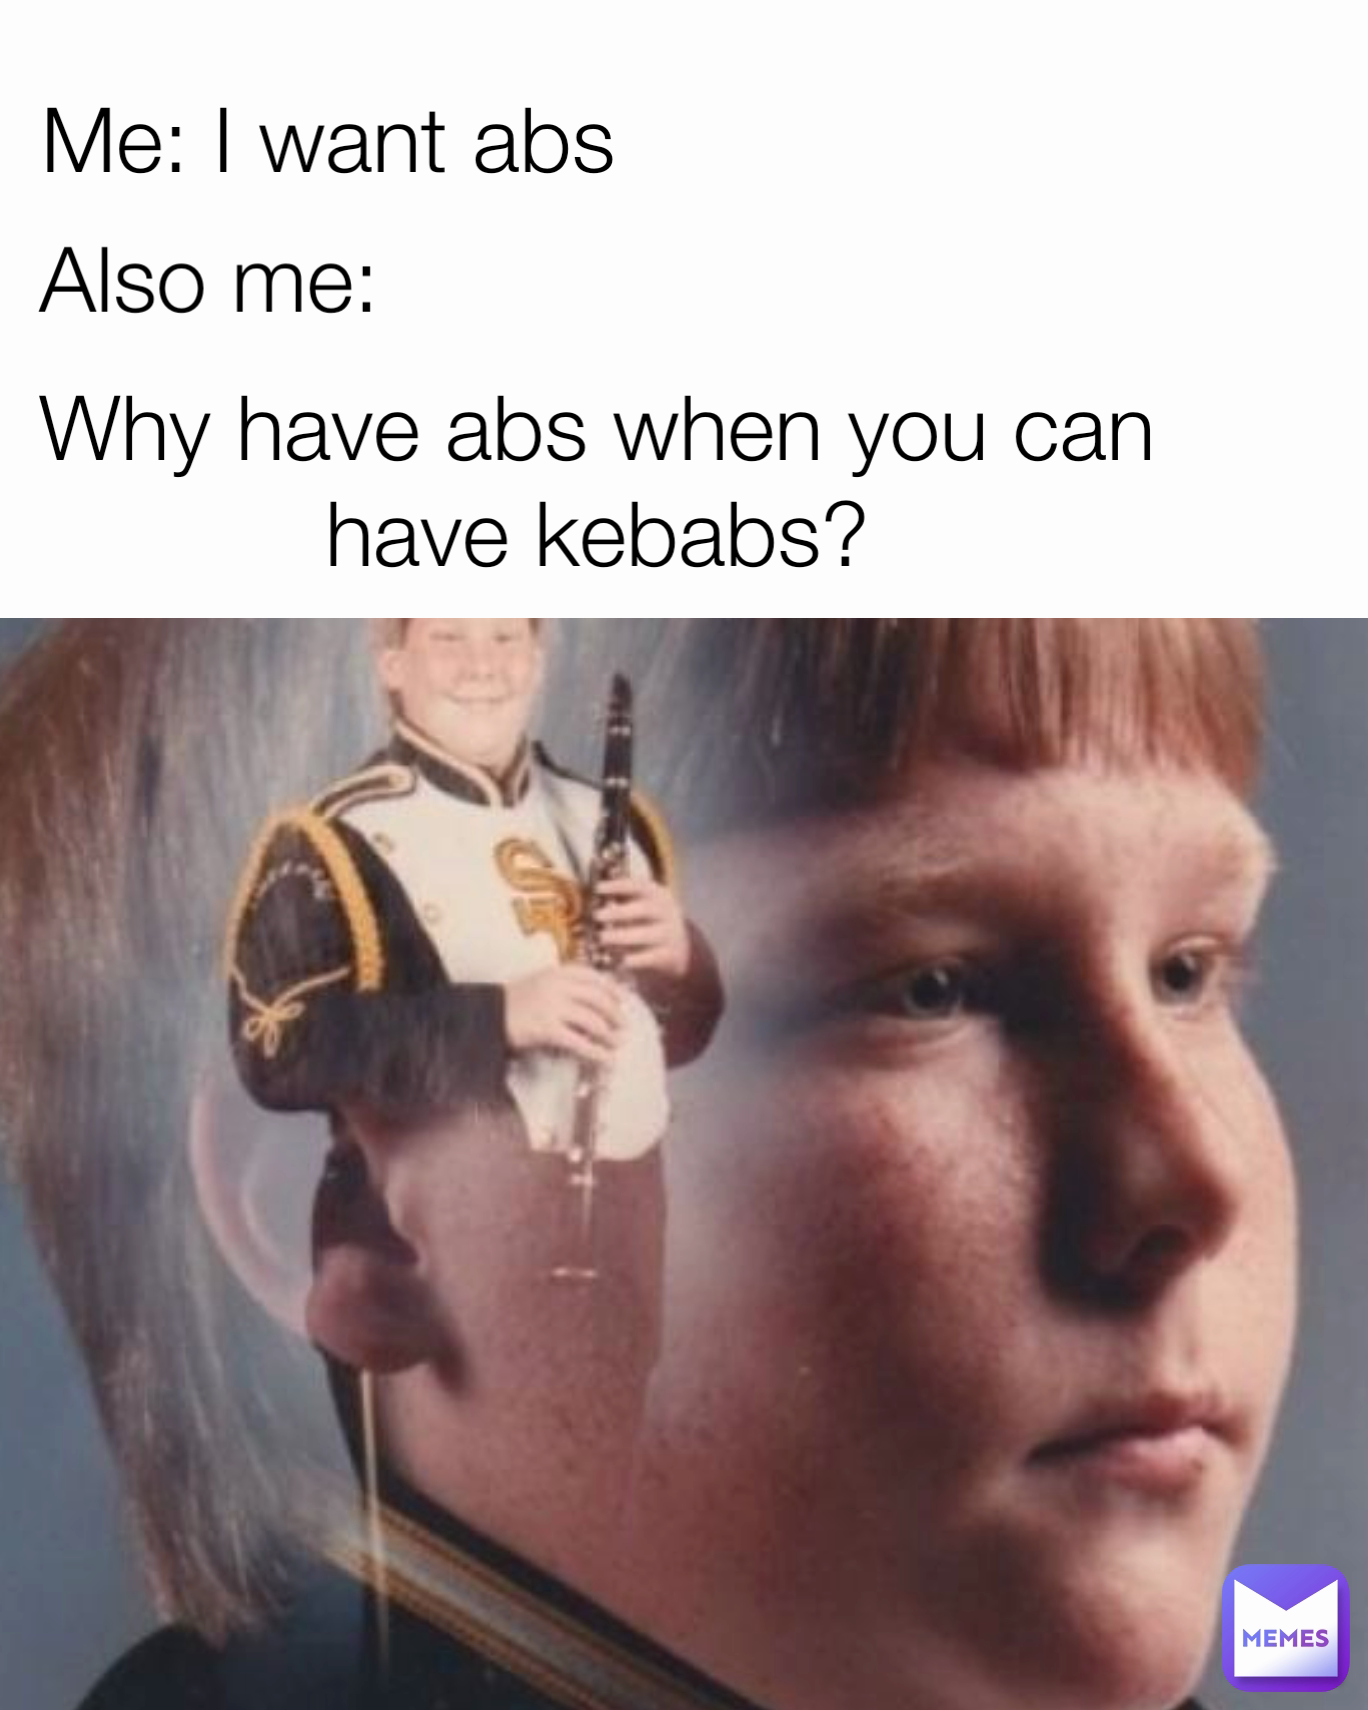 Me: I want abs Why have abs when you can have kebabs? Also me: